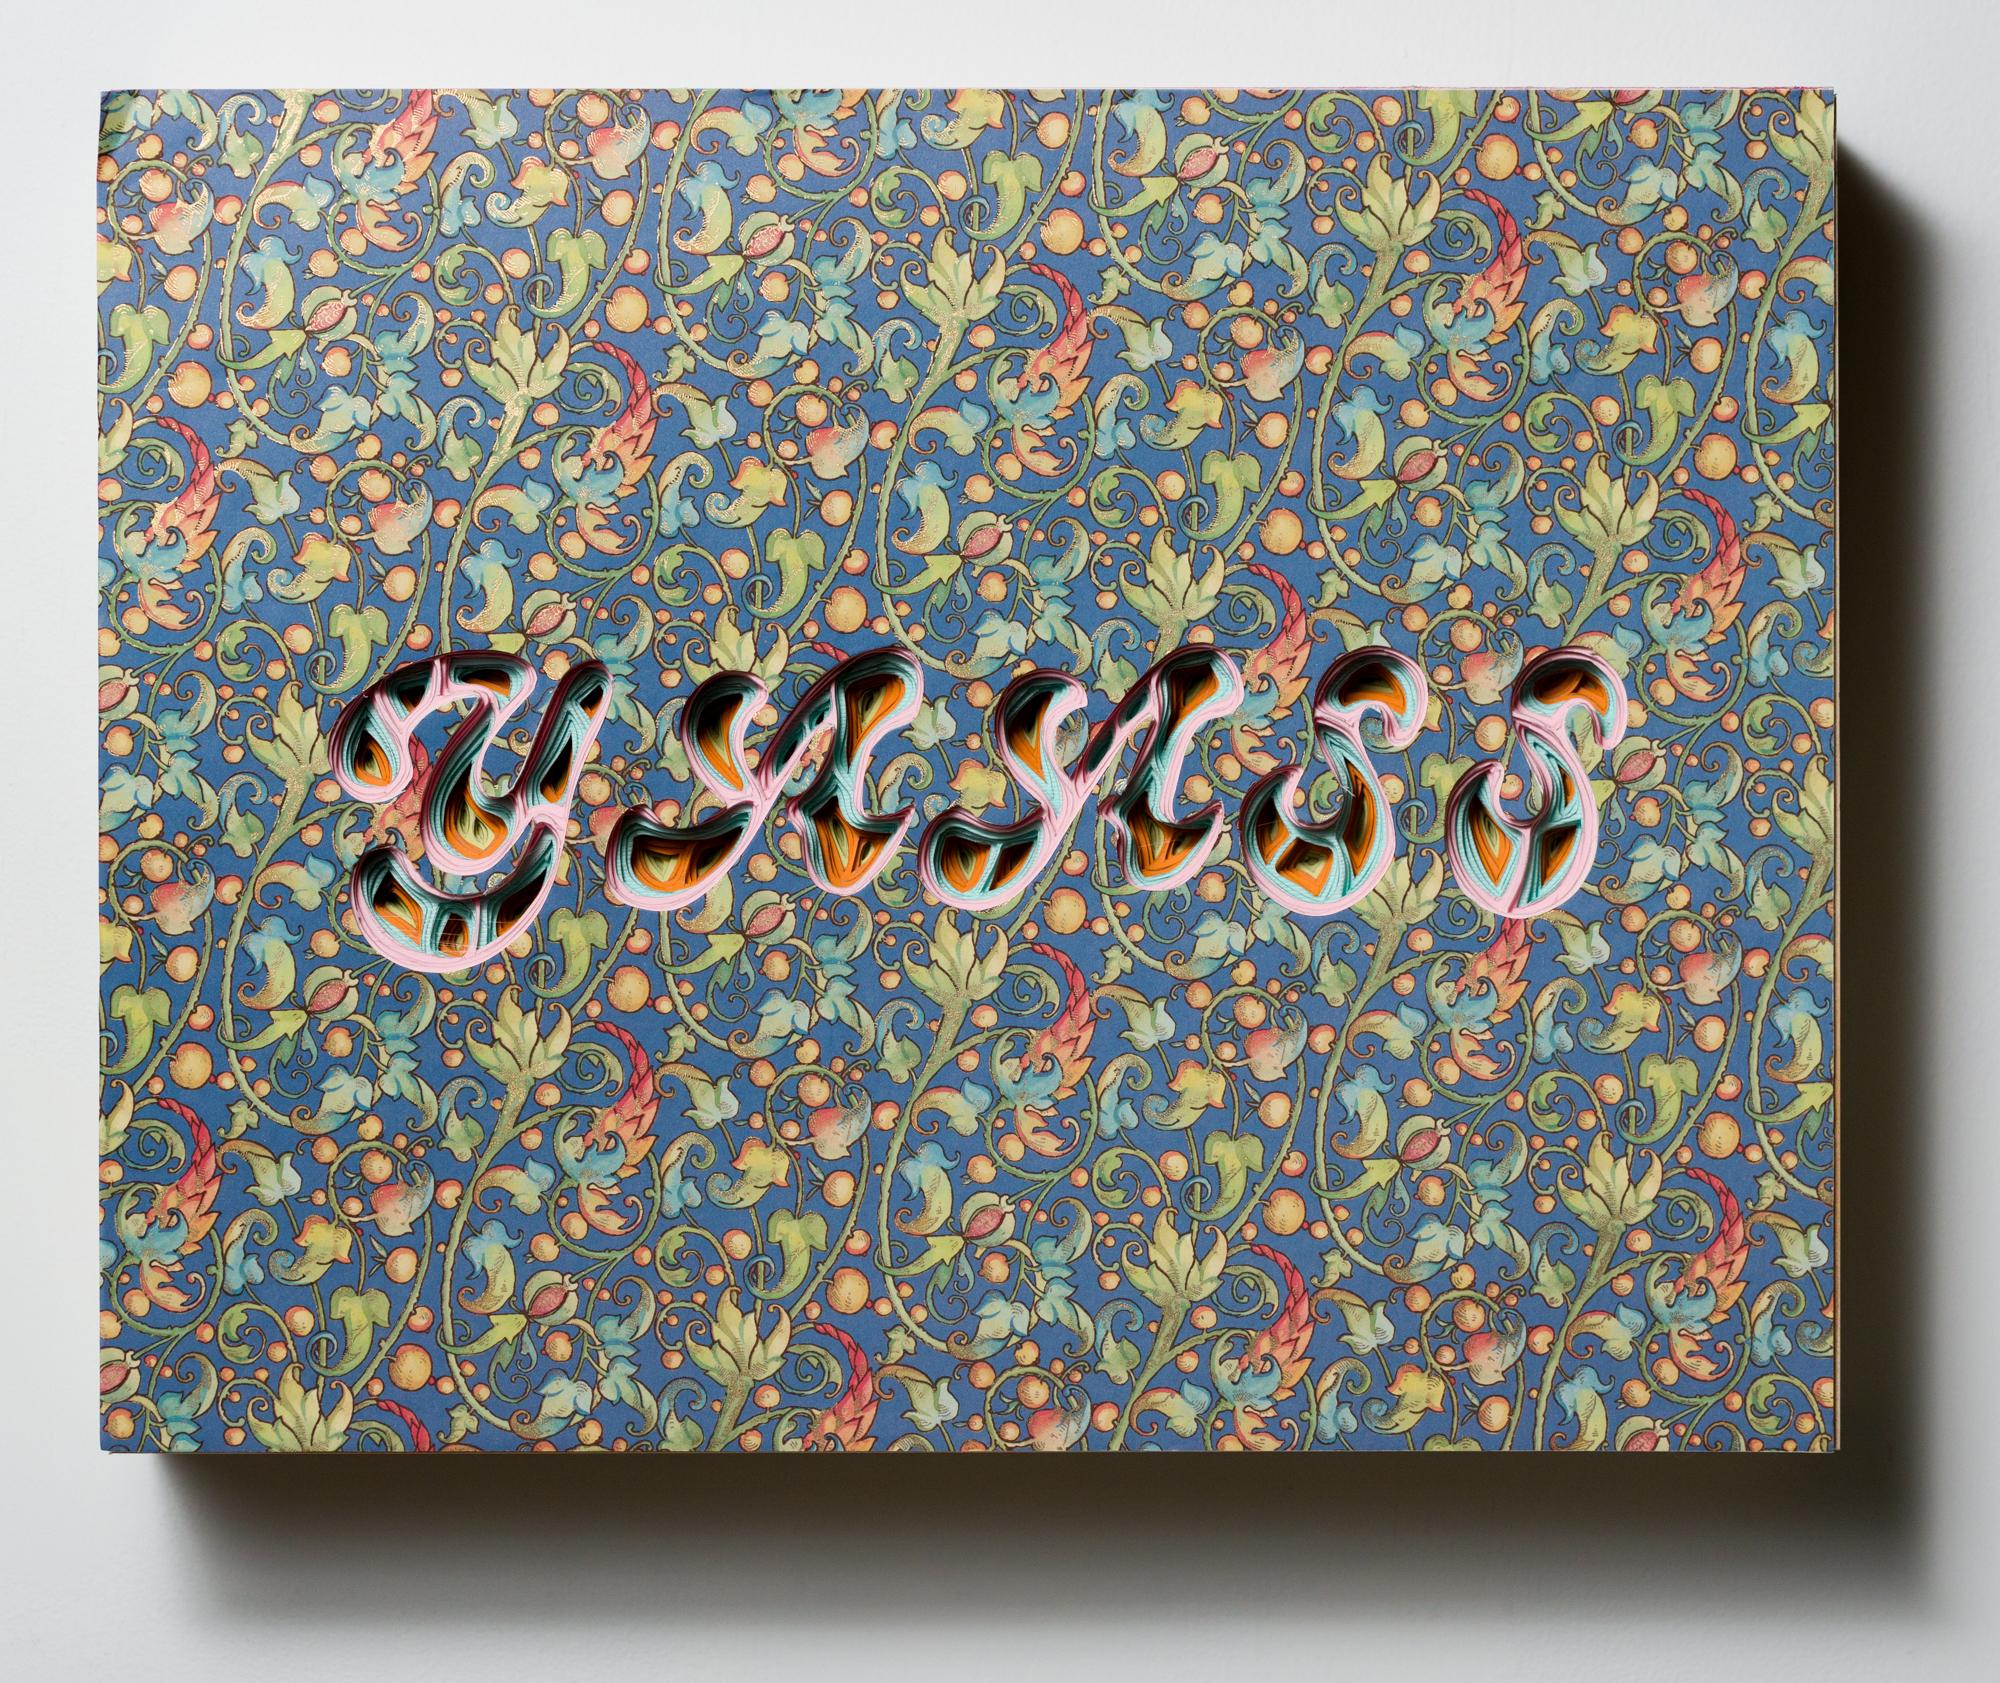 "YAASS" Text, layered and hand-cut paper, mounted on wood panel